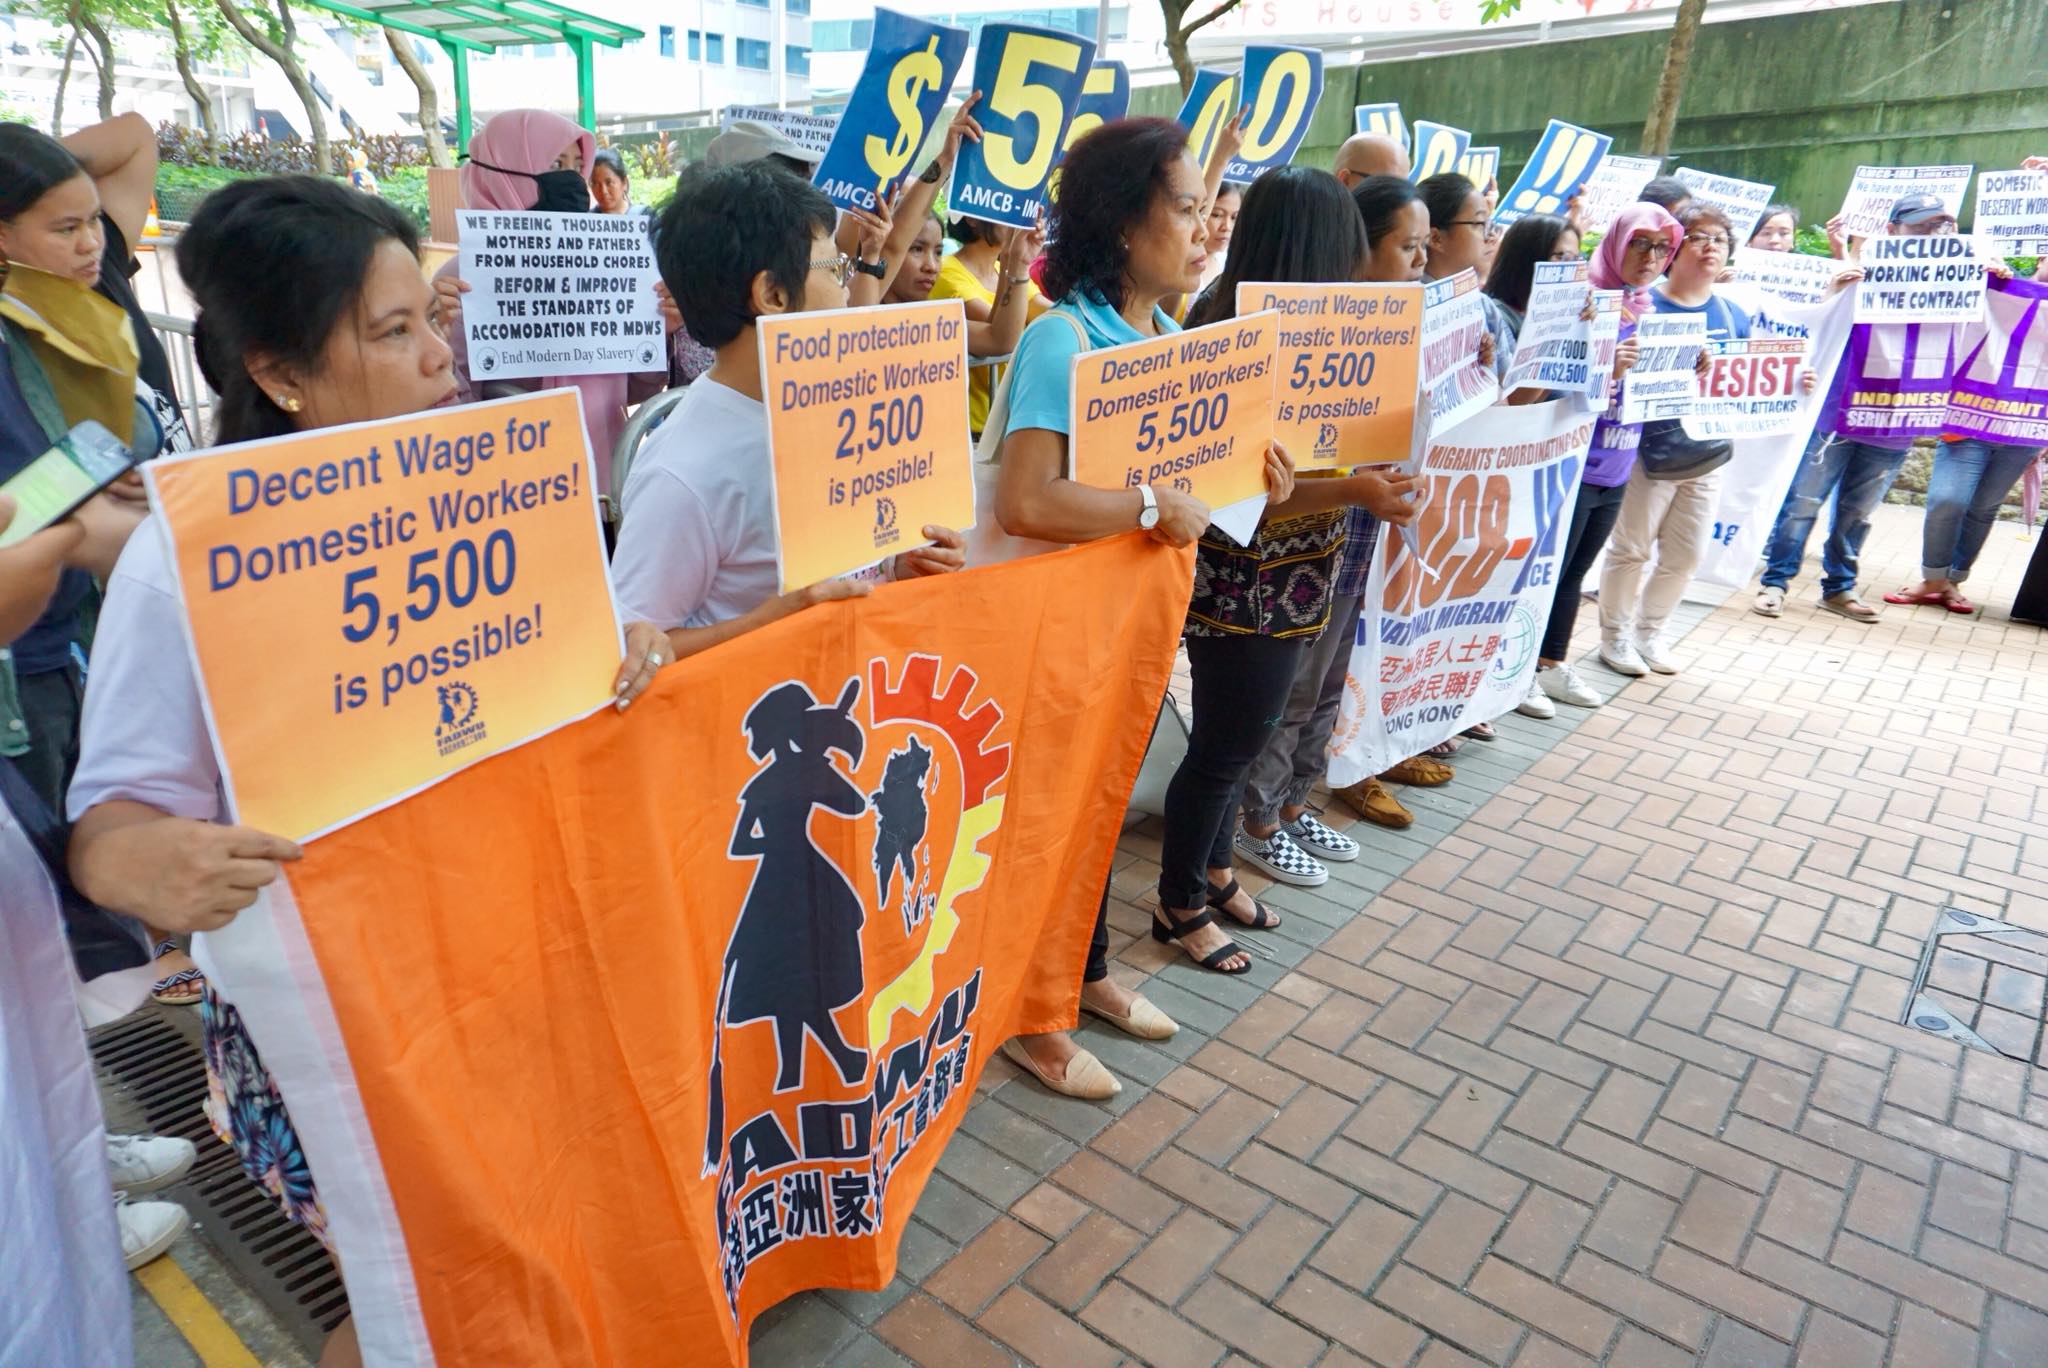 Domestic workers protest for a higher minimum wage yesterday outside the Labour Department. Picture via Facebook (香港亞洲家務工工會聯會　Hong Kong Federation of Asian Domestic Workers Unions FADWU)